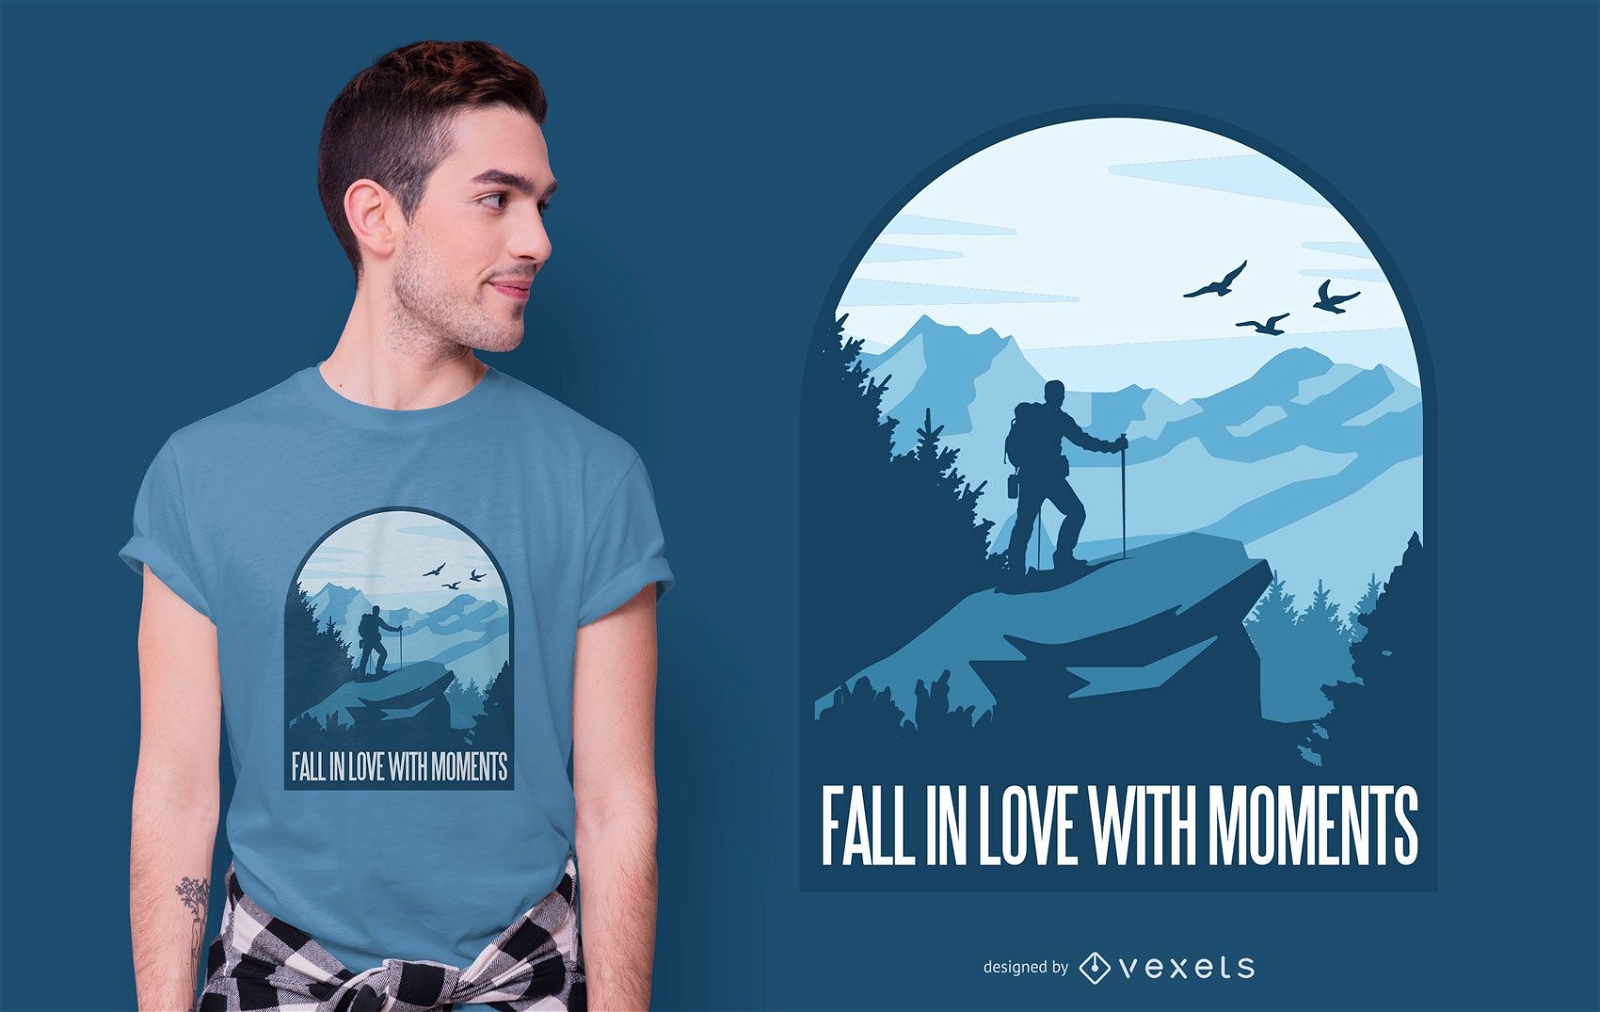 Love moments quote t-shirt design